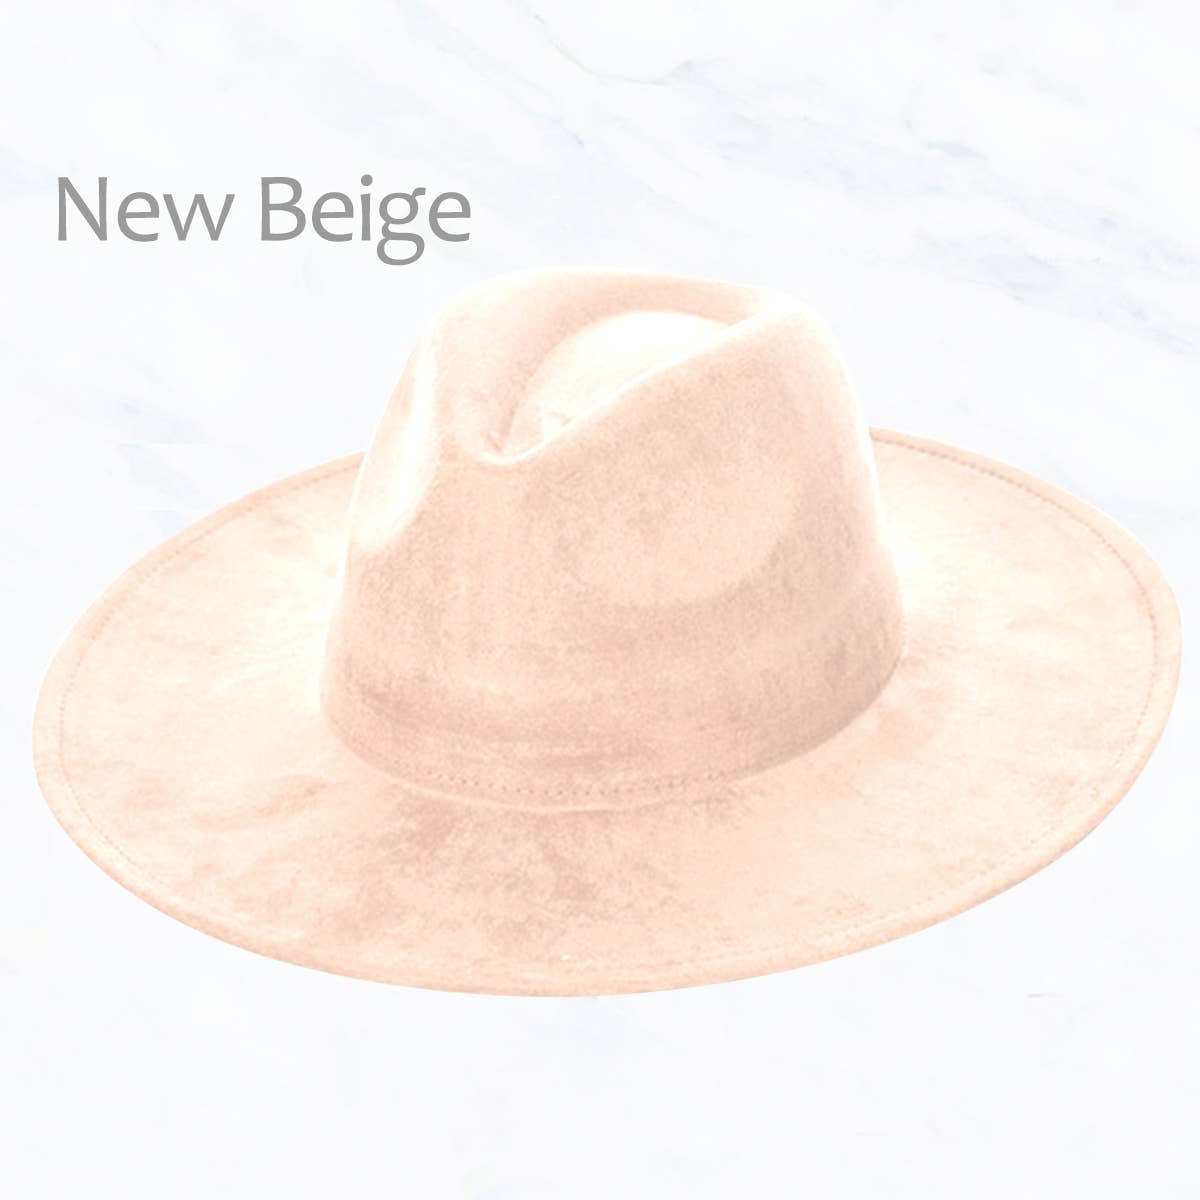 Suzie Q USA - Suede Large Eaves Peach Top Fedora Hat: Light Pink